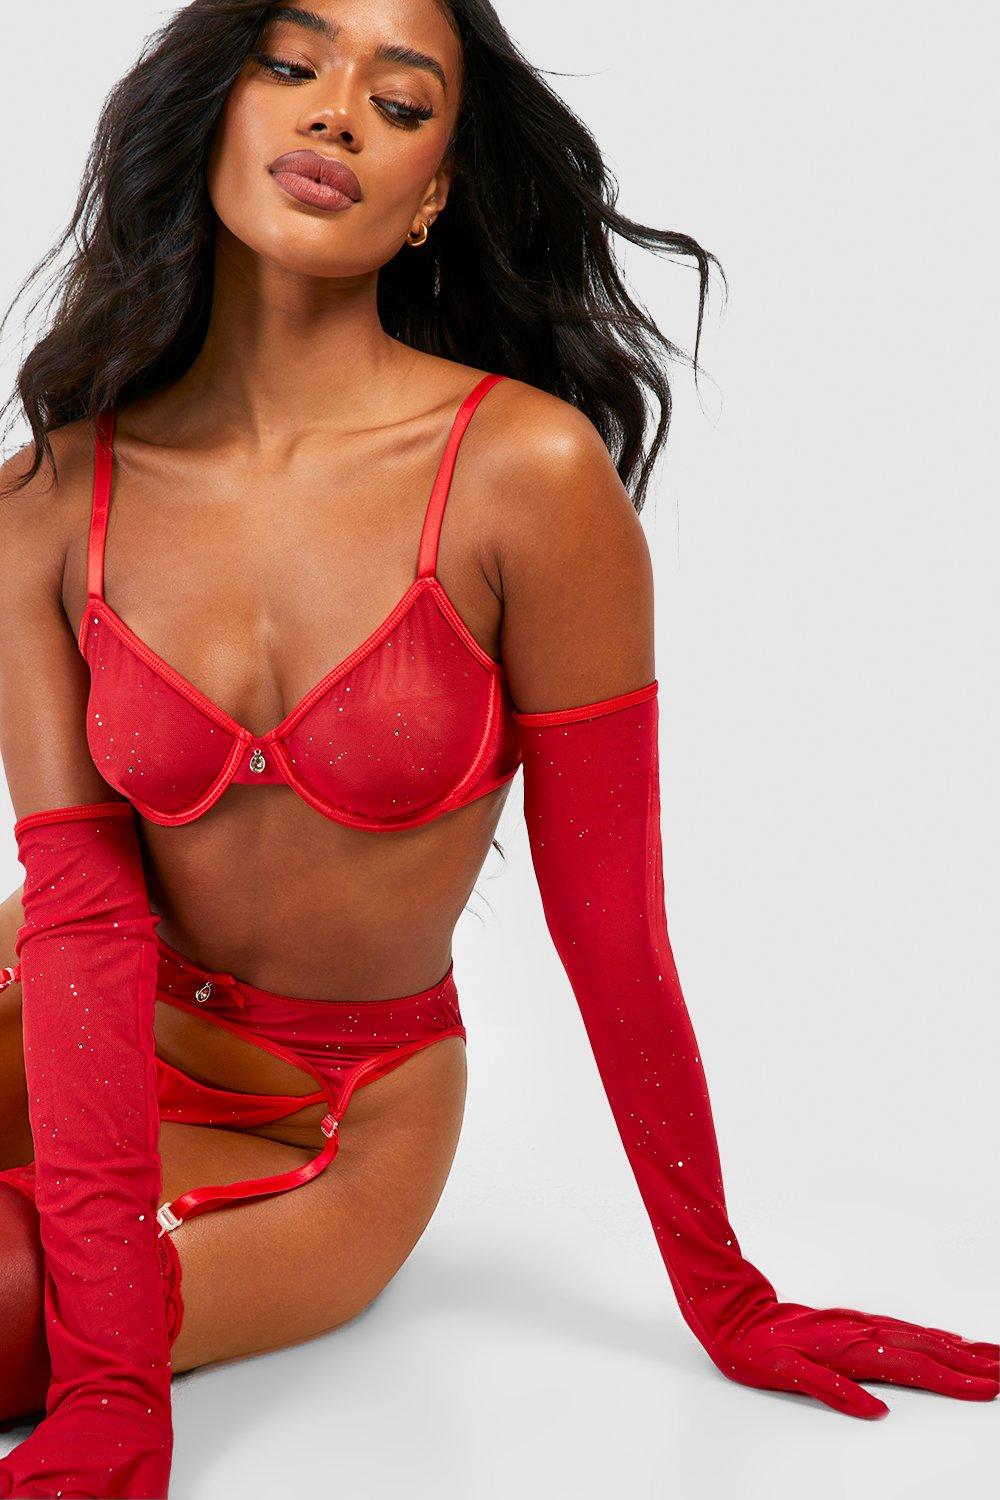 https://media.boohoo.com/i/boohoo/gzz70632_red_xl_3/female-red-sparkle-lingerie-and-suspender-set-with-gloves-